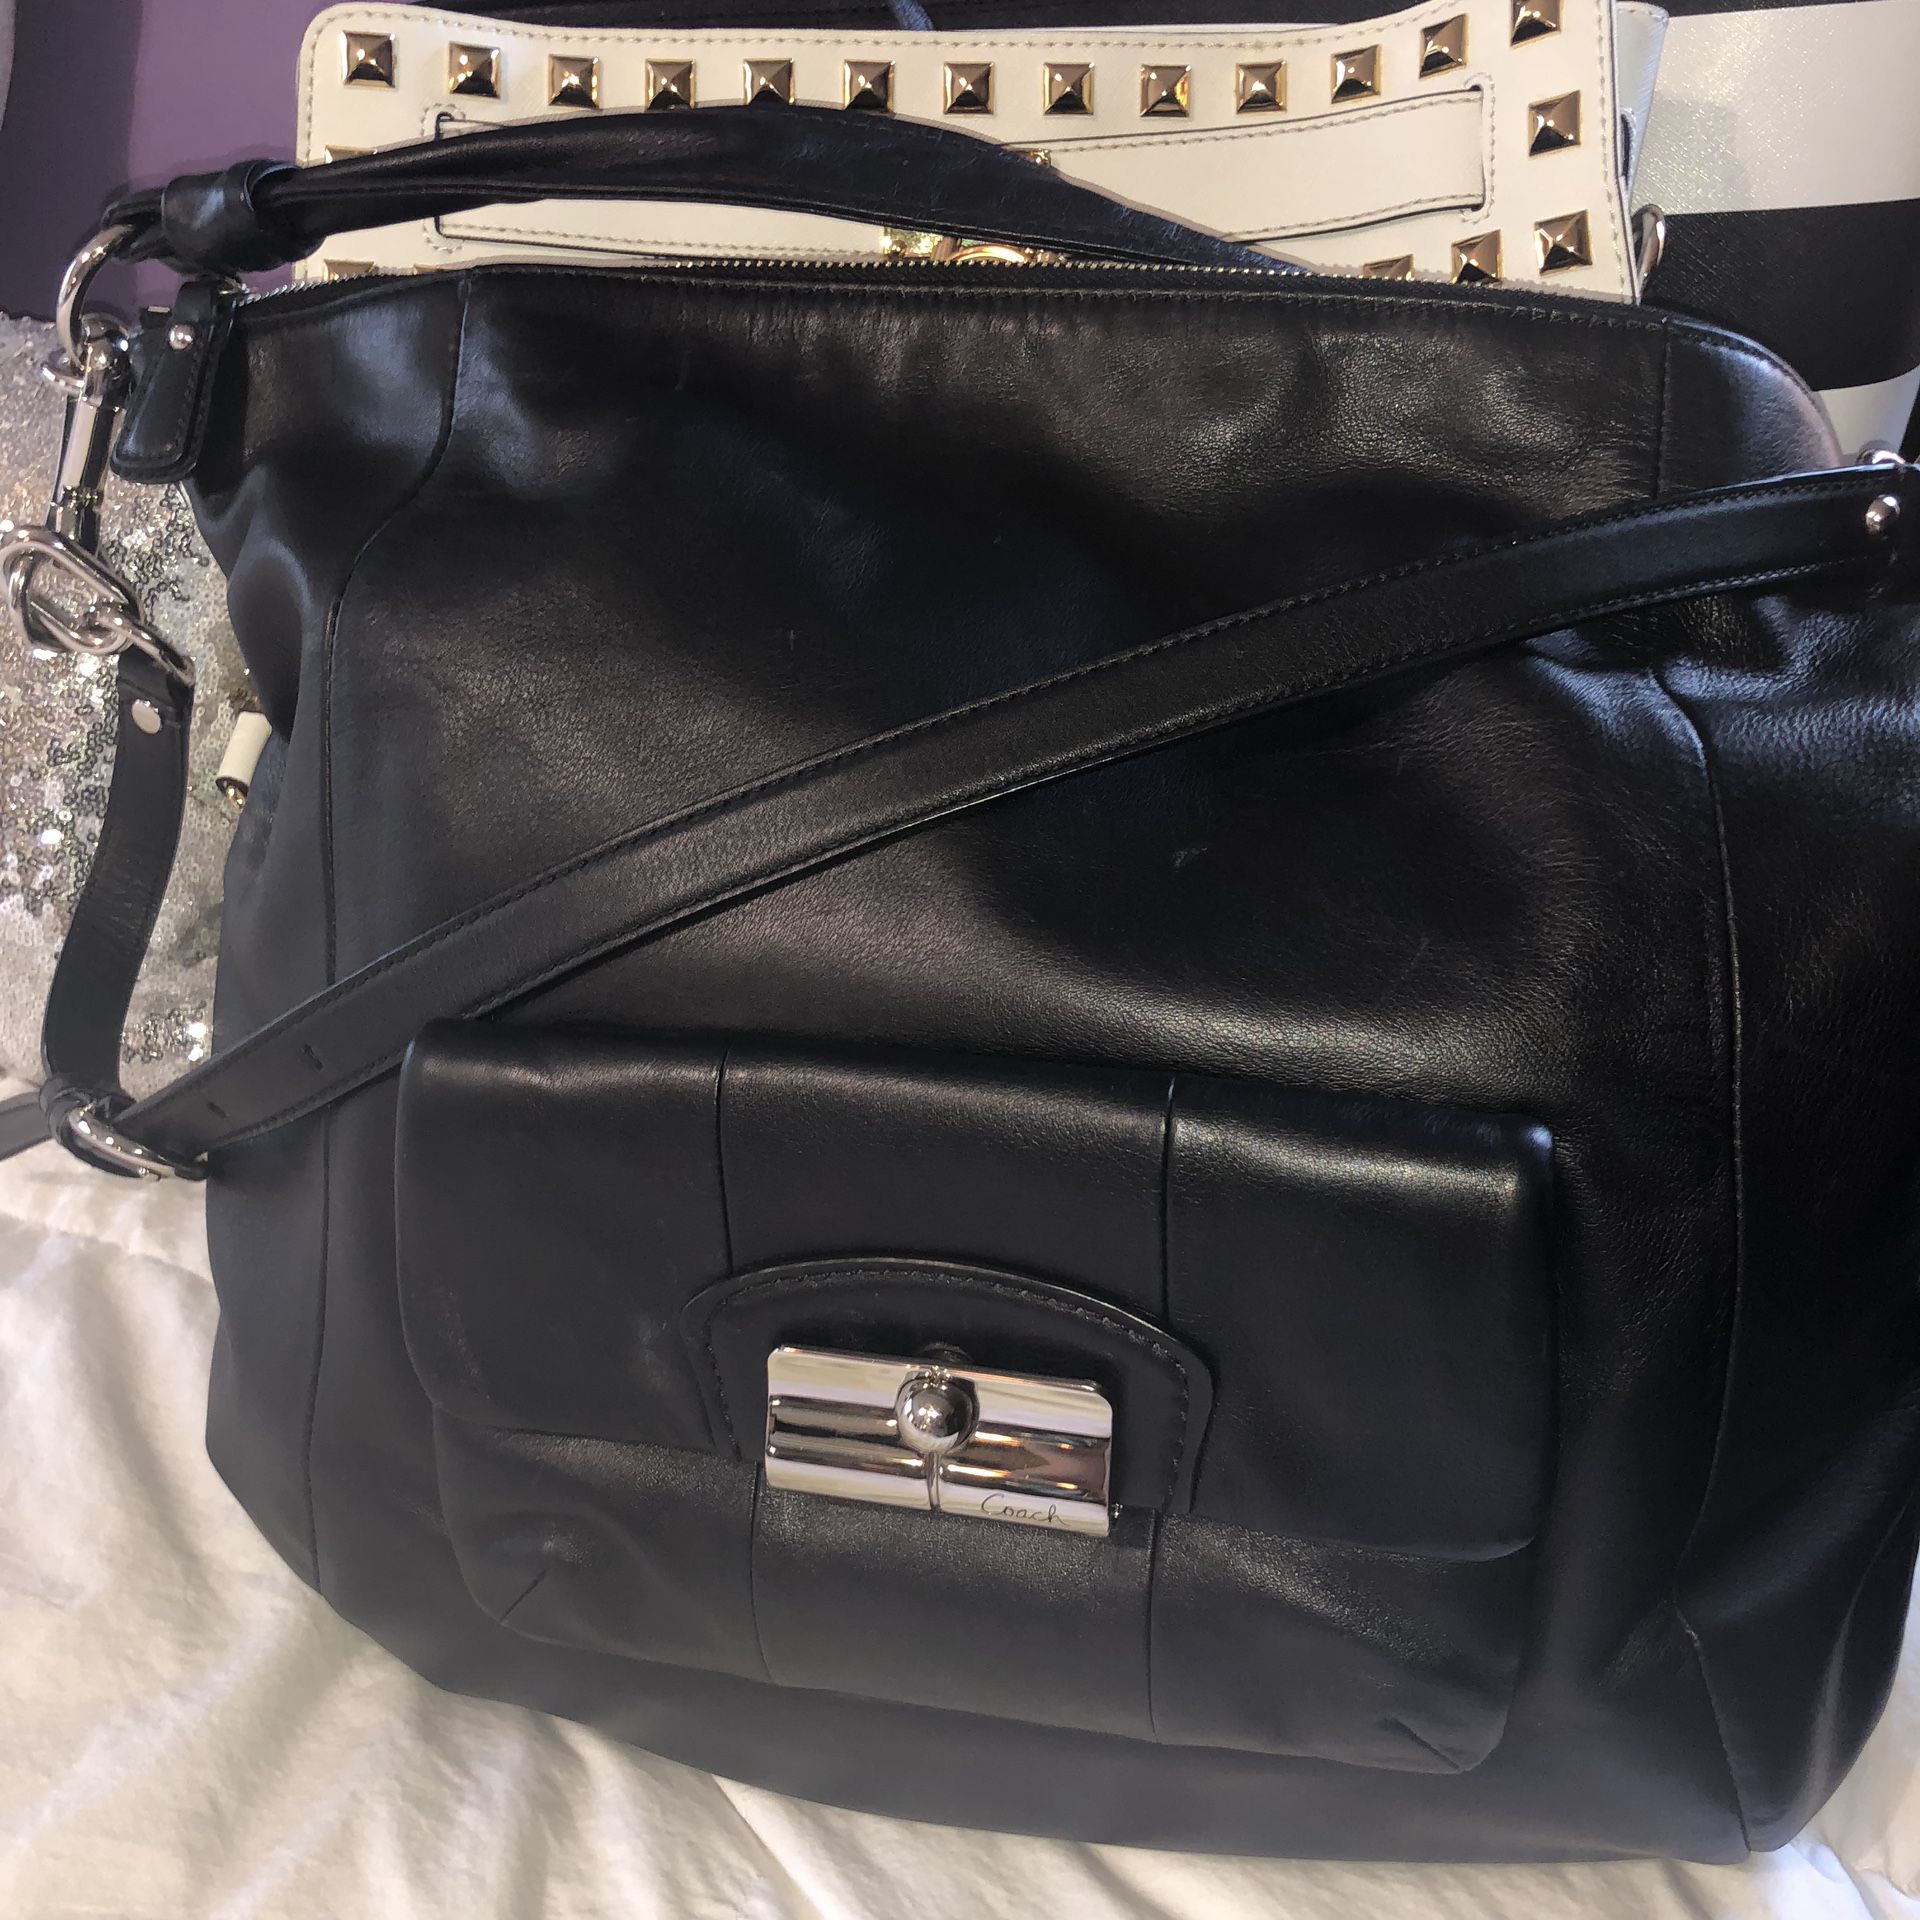 Brand NEW Coach bag all leather